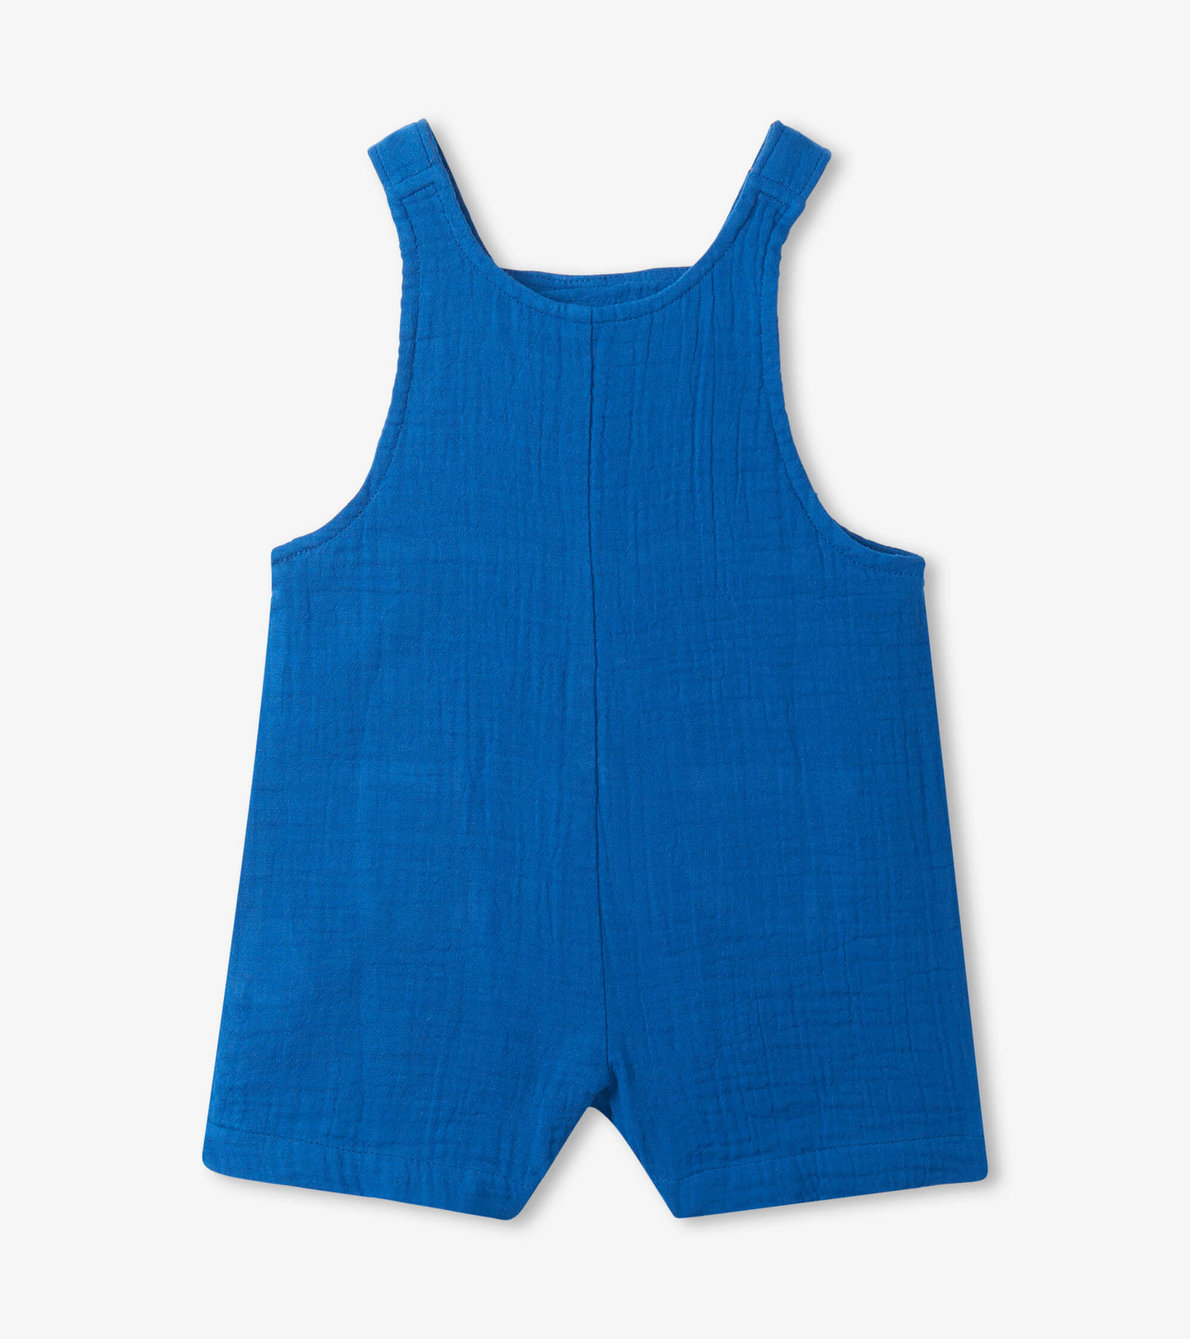 View larger image of Blue Baby Overalls